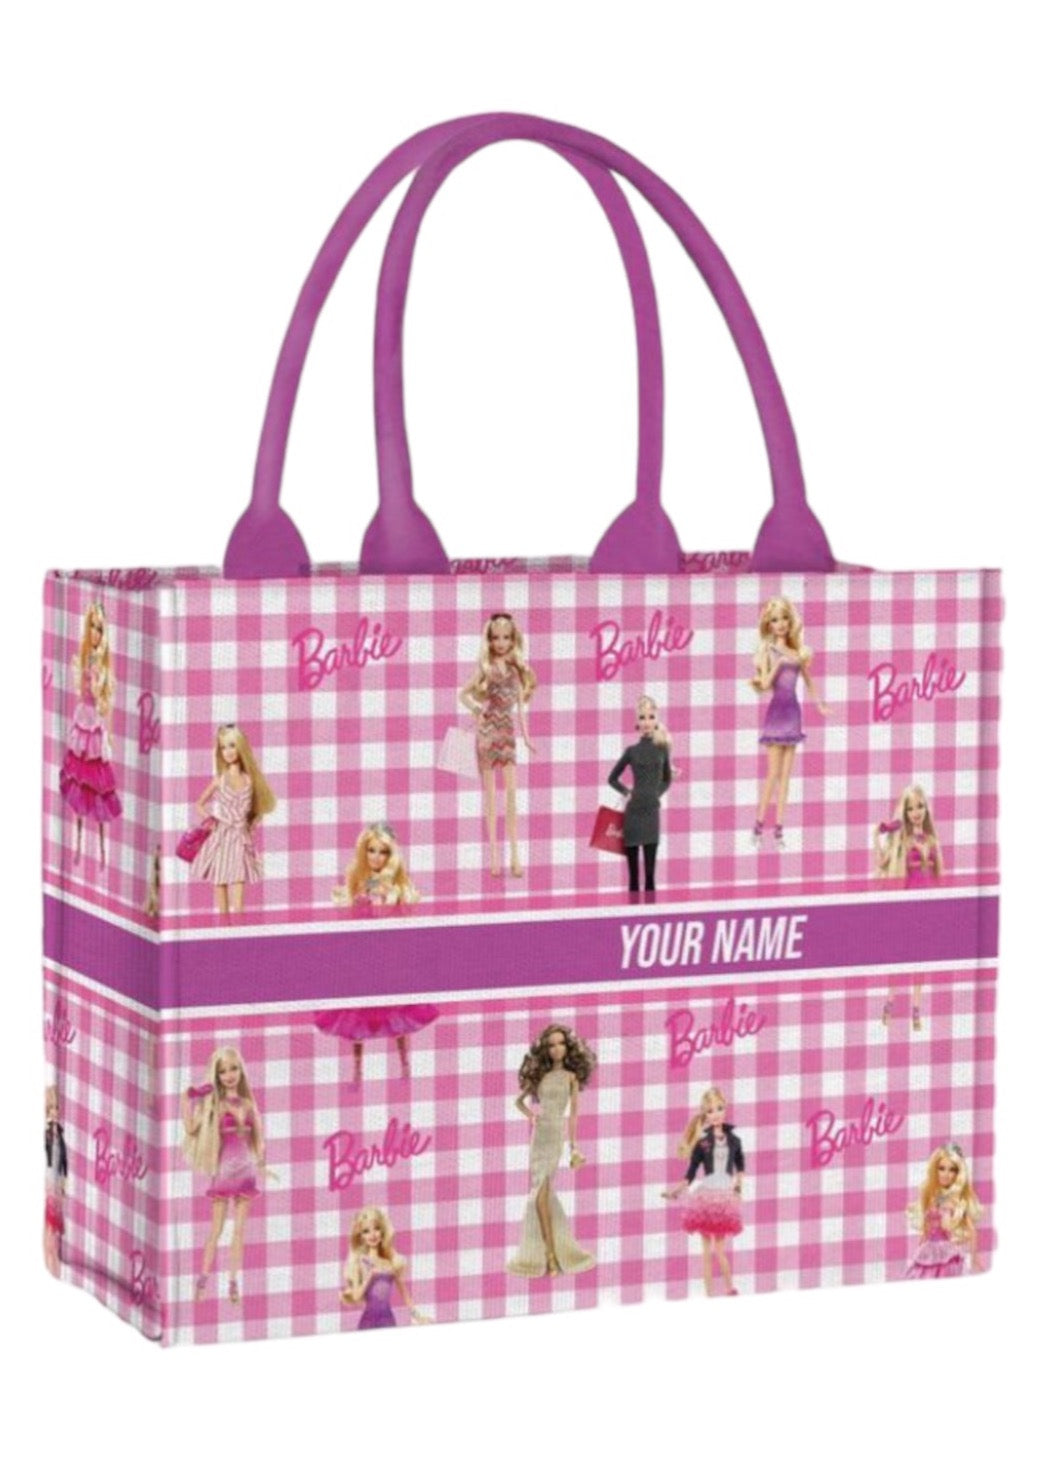 Plastic Canvas Barbie Fashion Doll Pattern ROSE TAPESTRY LUGGAGE, 3 Sizes -   Canada